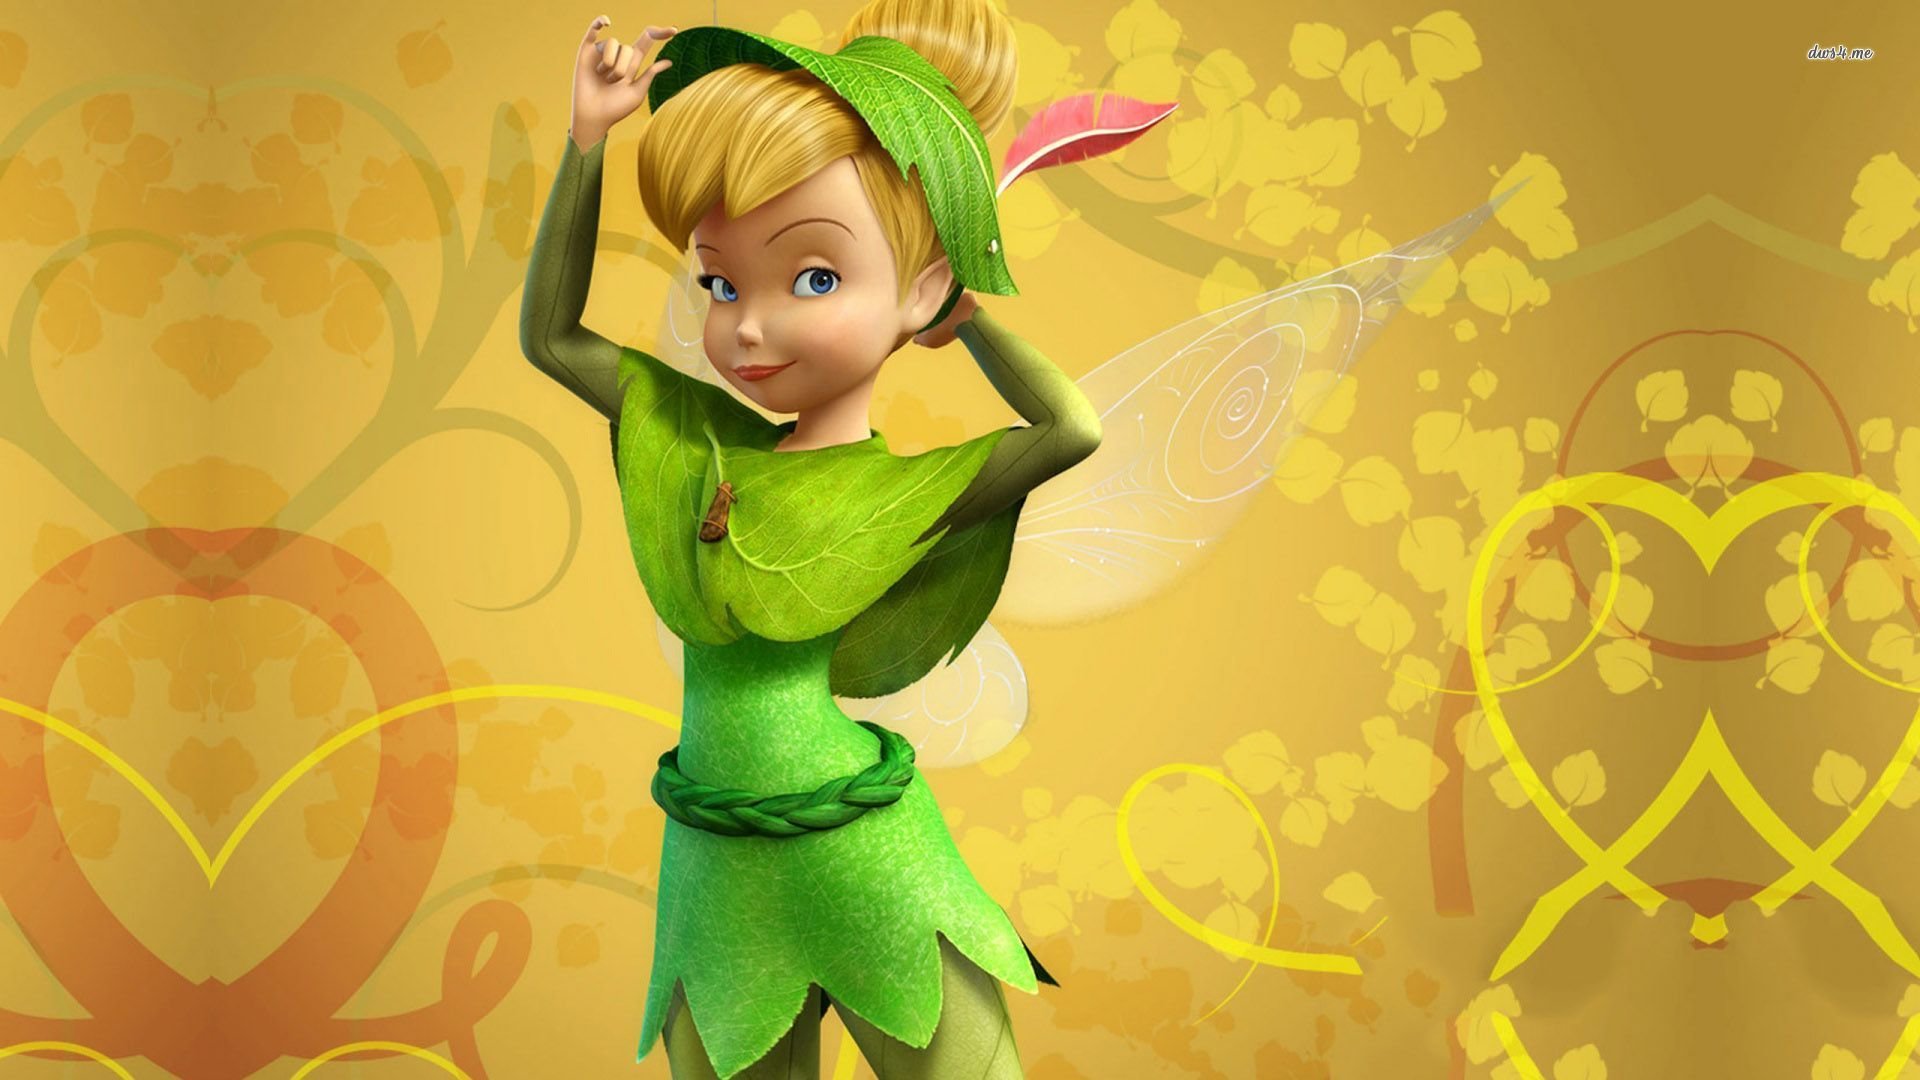 Download full hd 1920x1080 Tinker Bell PC wallpaper ID:354081 for free